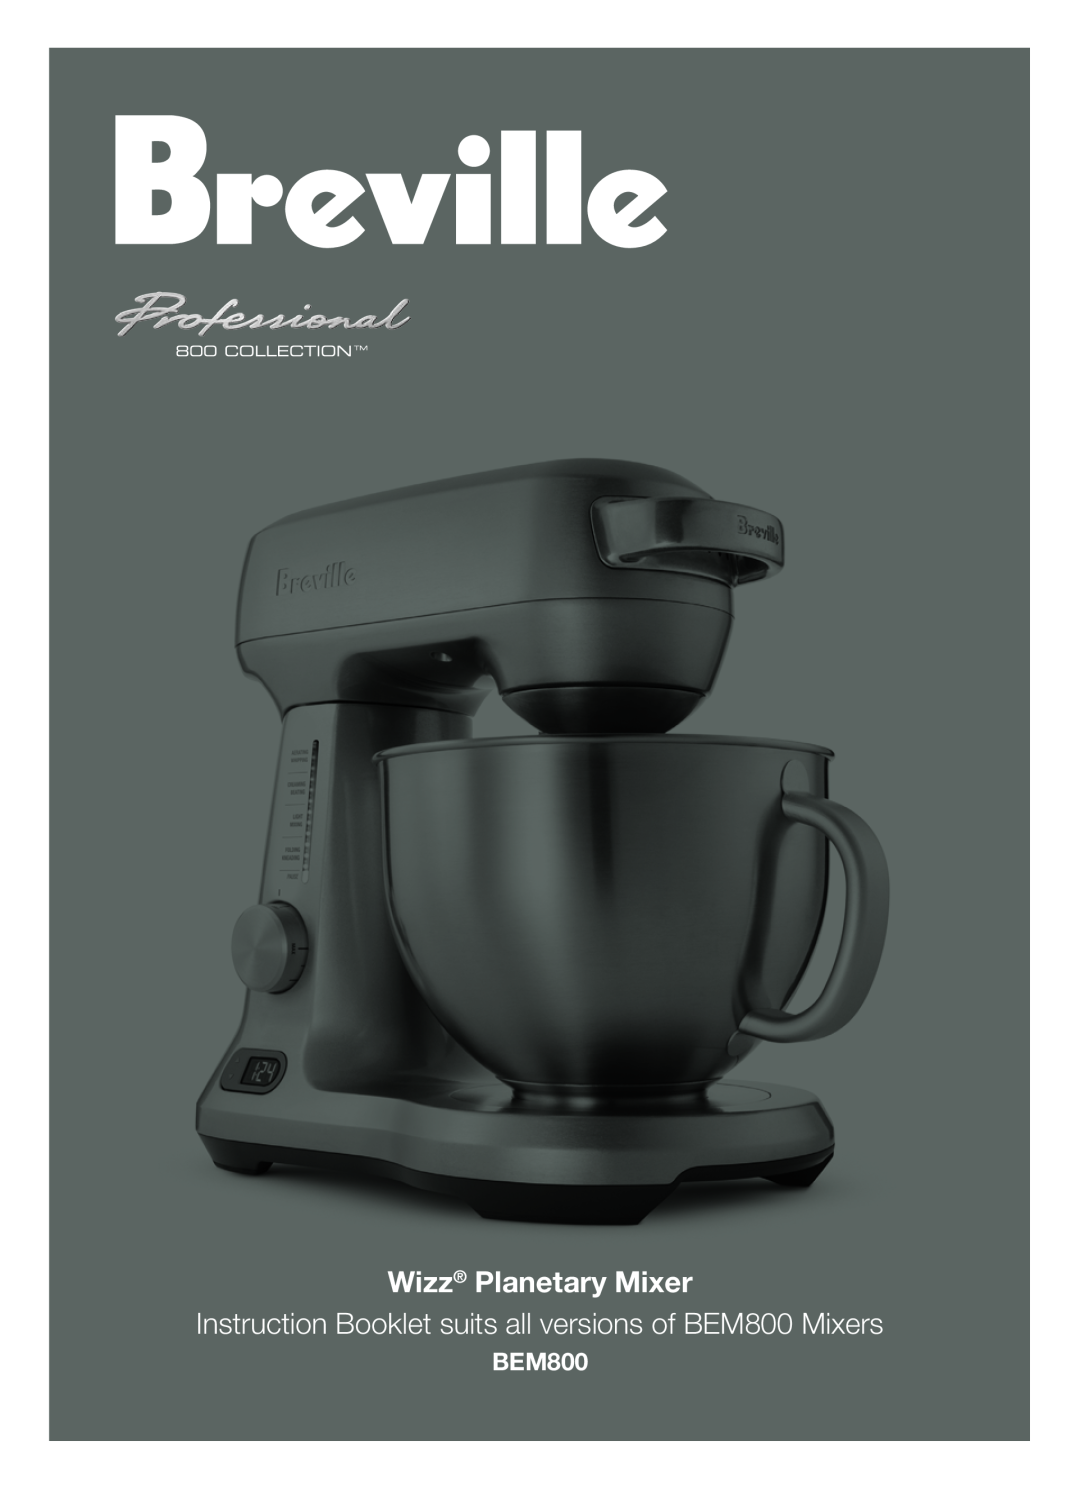 Breville manual Wizz Planetary Mixer, Instruction Booklet suits all versions of BEM800 Mixers 